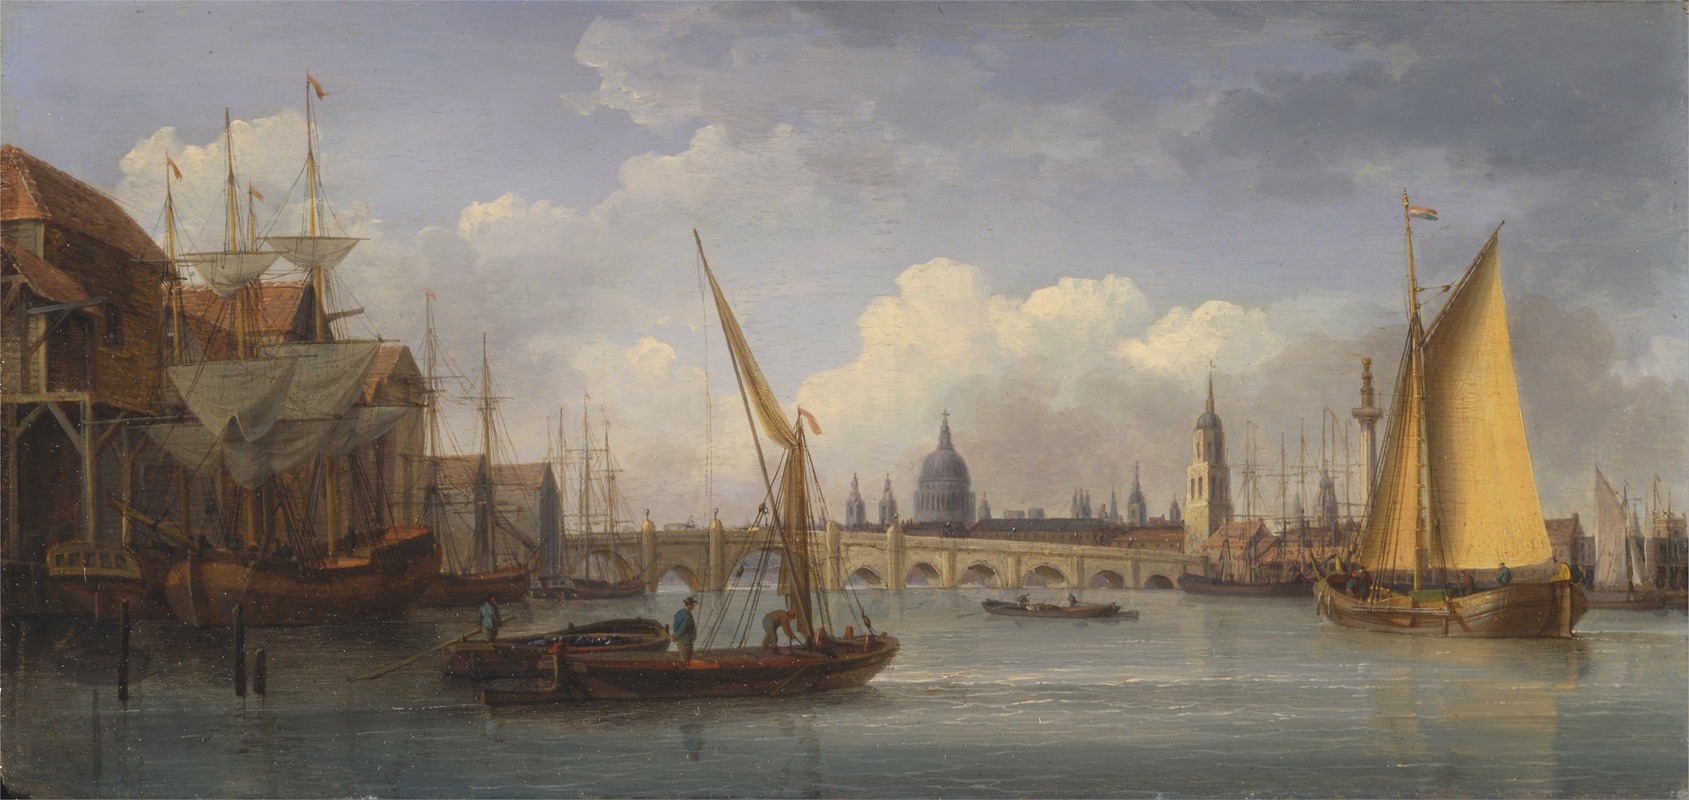 William Anderson - London Bridge, with St. Paul’s Cathedral in the distance